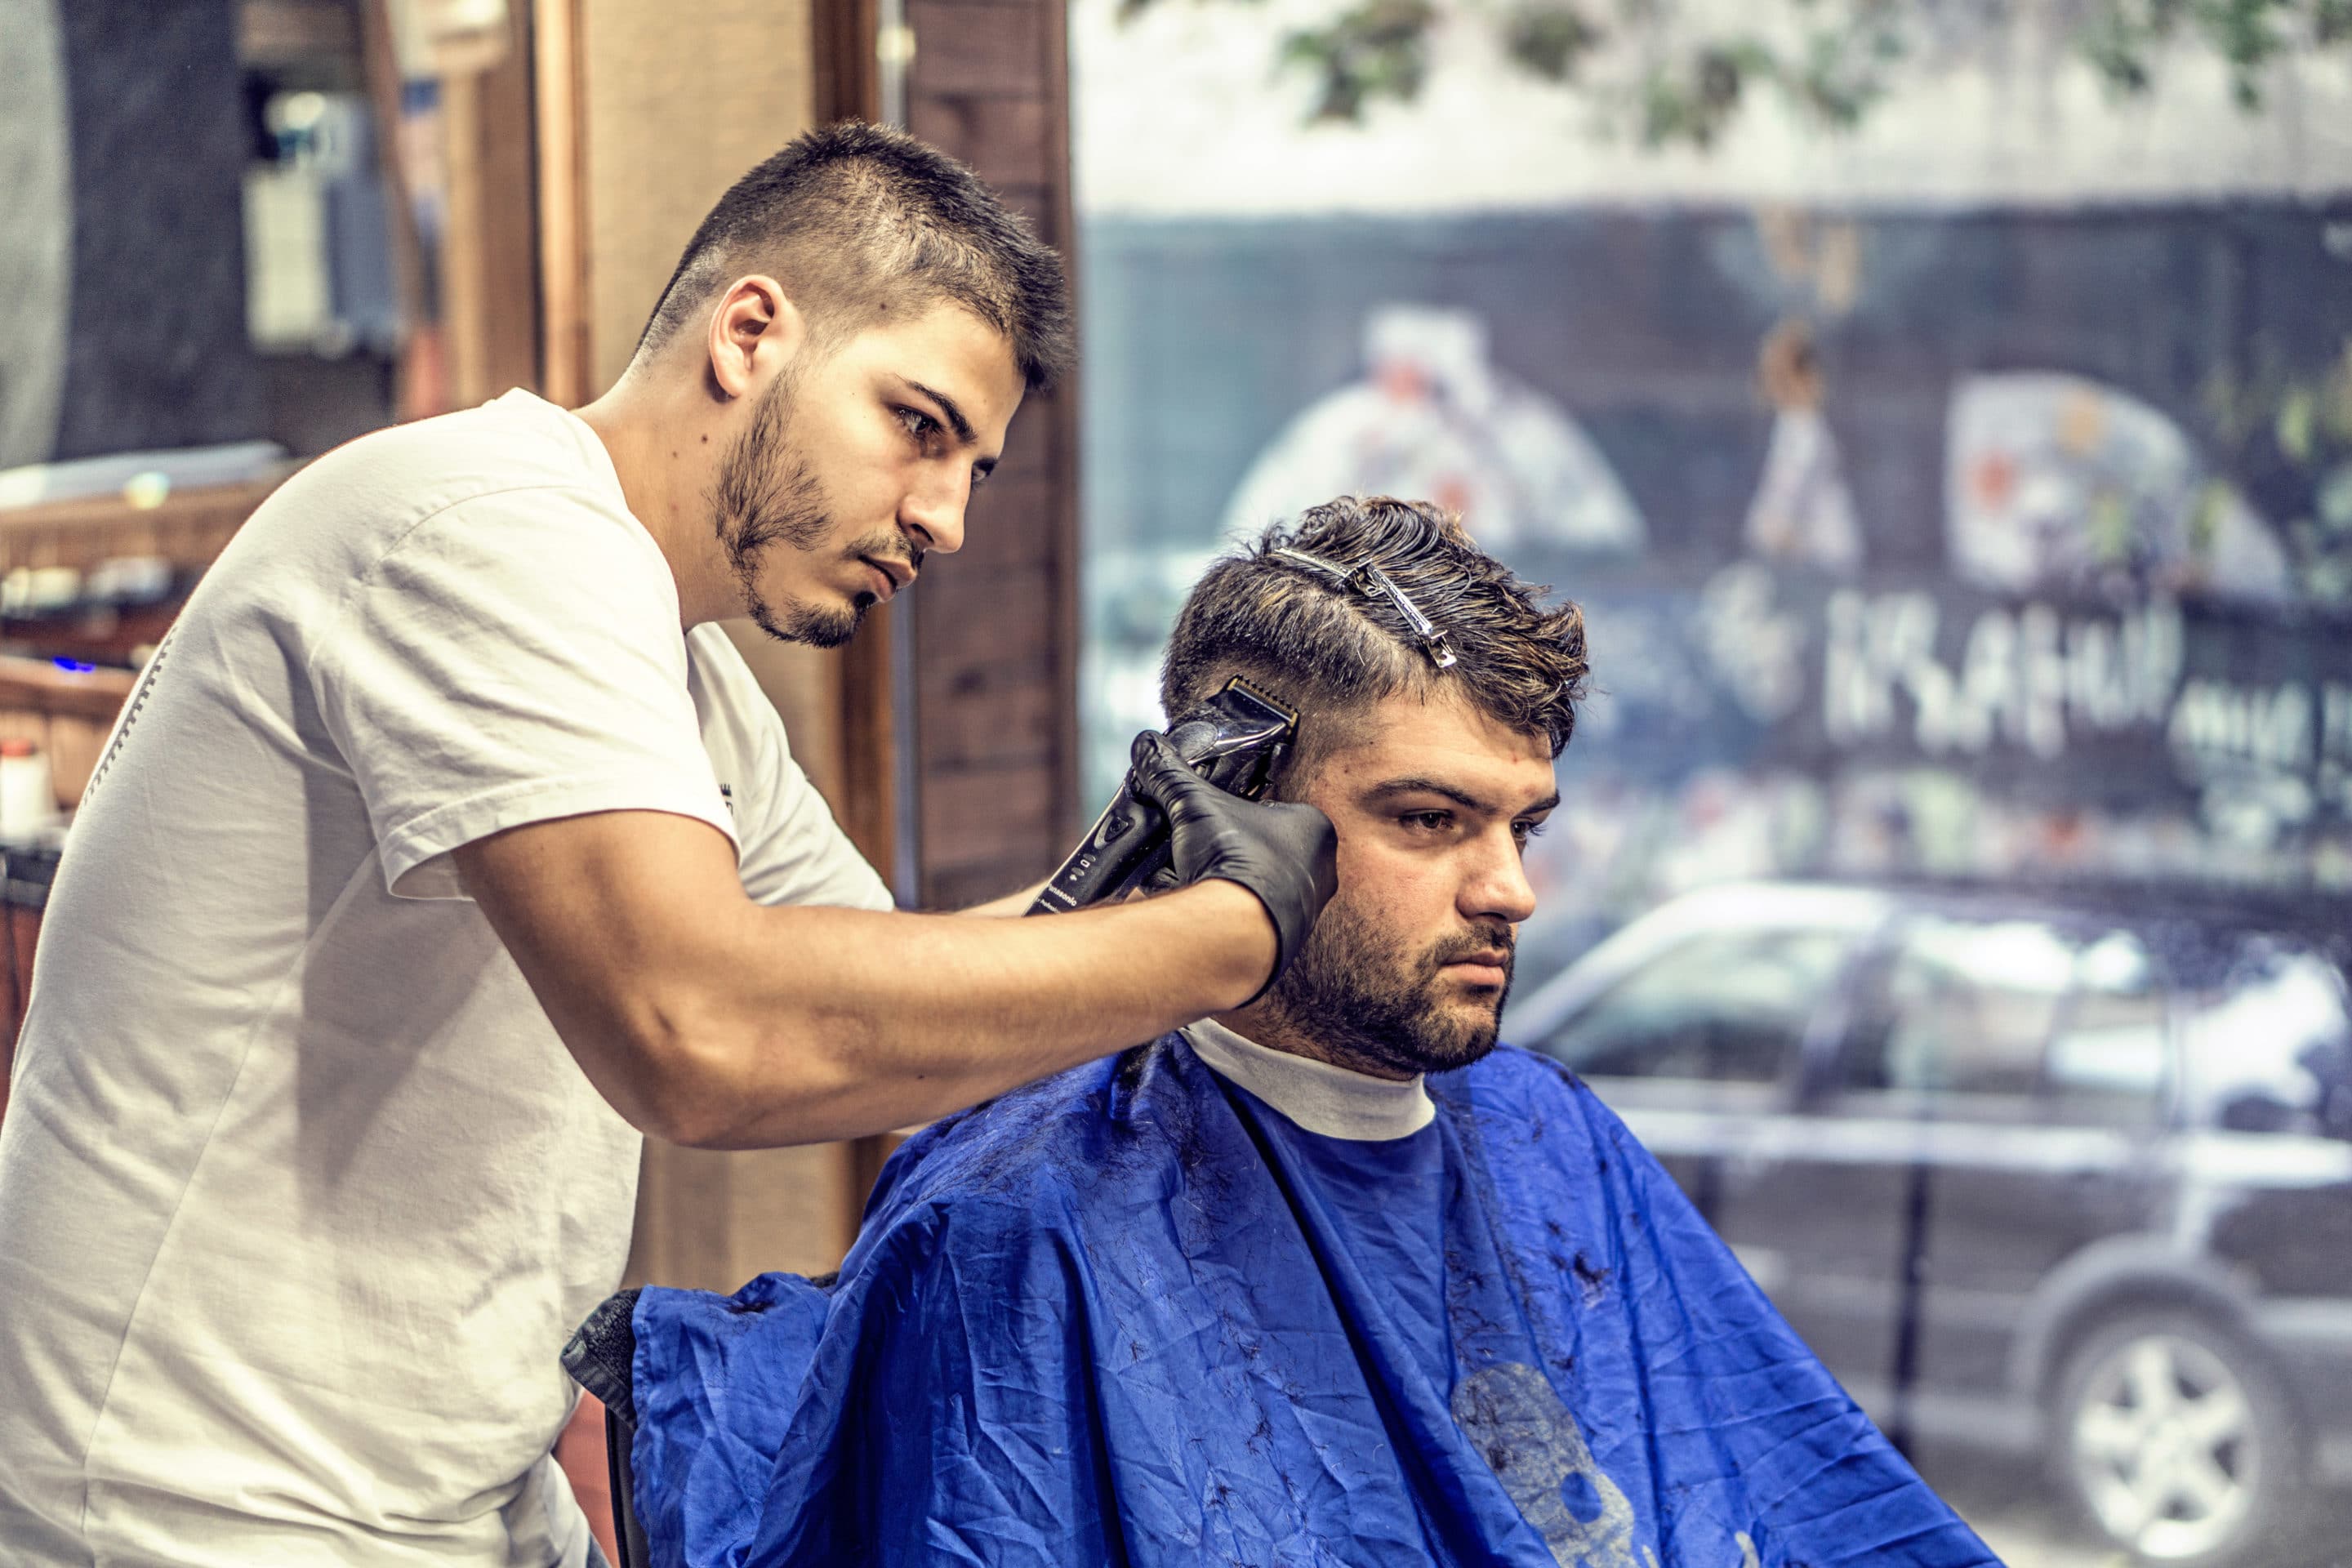 how to find a good barber, how to find a barber, how to pick a barber, how to pick a good barber, good barbers near men, nearest barber shop, barber shops in my area, barber shops in the area, barber shop near current location, find a barber shop near me, barber shop close to me, barbers around me, barber shops near my location, find barber shop, nearest barber, barber shop near me now, local barber shops, master barber near me, find a barber, local barbers near me, closest barber shop to my location, barber shops close to me, barber shops around me, closest barber shop near me, barber near here, traditional barber shop near me, barber shop near my current location, find a barber near me, barber near me now, nearest barber shop near me, barber shops in my location, closest barbershop, barber near my location, barber shop close by, barber shop in my area, closest barber, barber shop near here, good barber shops, local barber shops near me, barber shop current location, find barber shop near you, the nearest barber shop, barber shop near by, nearest barber shop to my location, nearest barber shop to my current location, barber shop closest to my location, where is the nearest barber, barber shops by me, where is the nearest barber shop, nearest barber shop to this location, local barber shops in the area, the good barber, barber shop near, barber shops close to my location, find me a barber shop, barber near my current location, close barber shops, great barber shops near me, find the nearest barber shop, nearest barbershop to my current location, how to find a good barber, barber shop around here, find me the nearest barber, find a barber shop near my location, best barbers around me, great barbers near me, barbers near by, where is the closest barber shop, good barber shops nearby, barber shop close, best barber shops around me, the nearest barbershop to my location, barber shop my location, find local barber shops, nearest barber shop in my area, barber finder, barber shop finder, where is the closest barber, looking for a good barber, find the closest barber shop, how to find a barber, find barber shops around me, open barber shops near my location, the best barber near me, finding a good barber, where is the nearest barber shop to me, near by barbers, real barber shop near me, barber shop close to here, the good barber barber shop, find nearest barber, find me a barber, find a barber shop nearby, find me a barber sop near me, find me the nearest barber shop, find closest barber shop, locate nearest barber shop, closest barber to my location, show me the nearest barber shop, finding a good barber, how to find a barber, best barbers